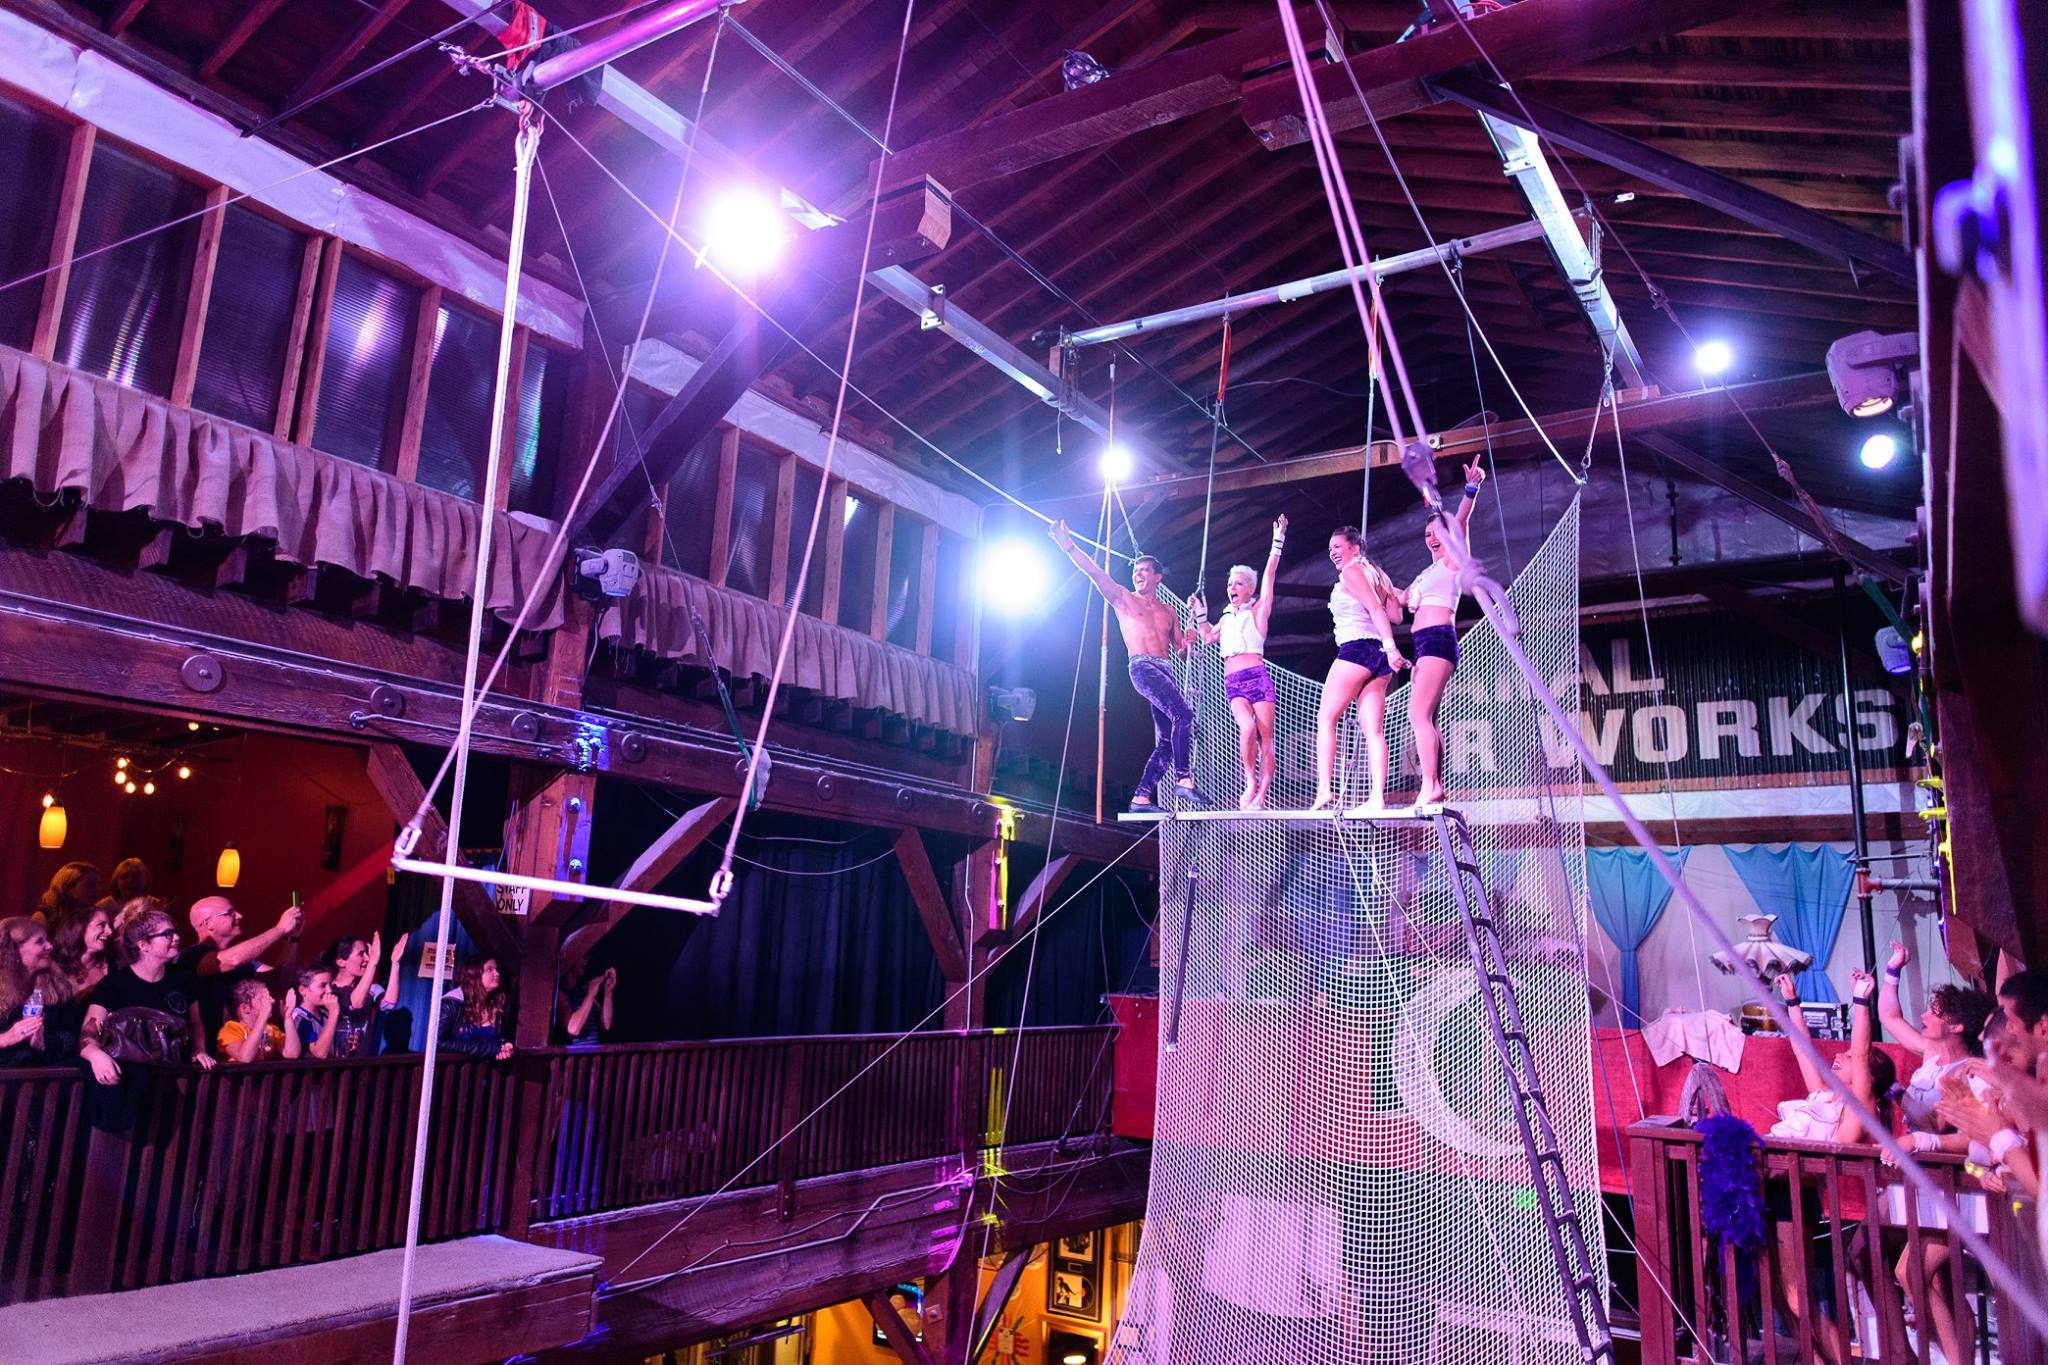 Weddings, Corporate Events, and parties at Emerald City Trapeze Arts